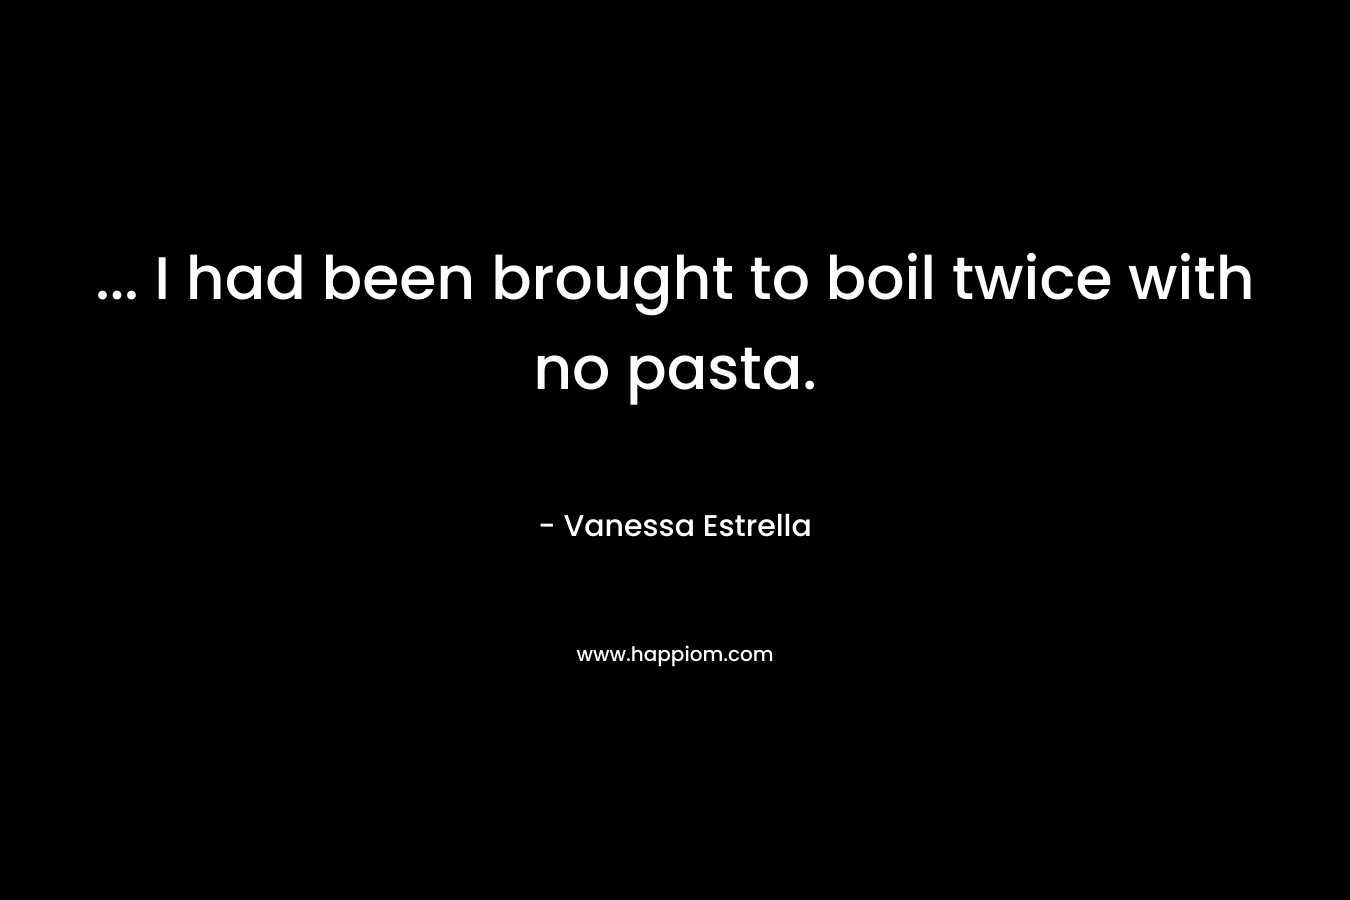 … I had been brought to boil twice with no pasta. – Vanessa Estrella